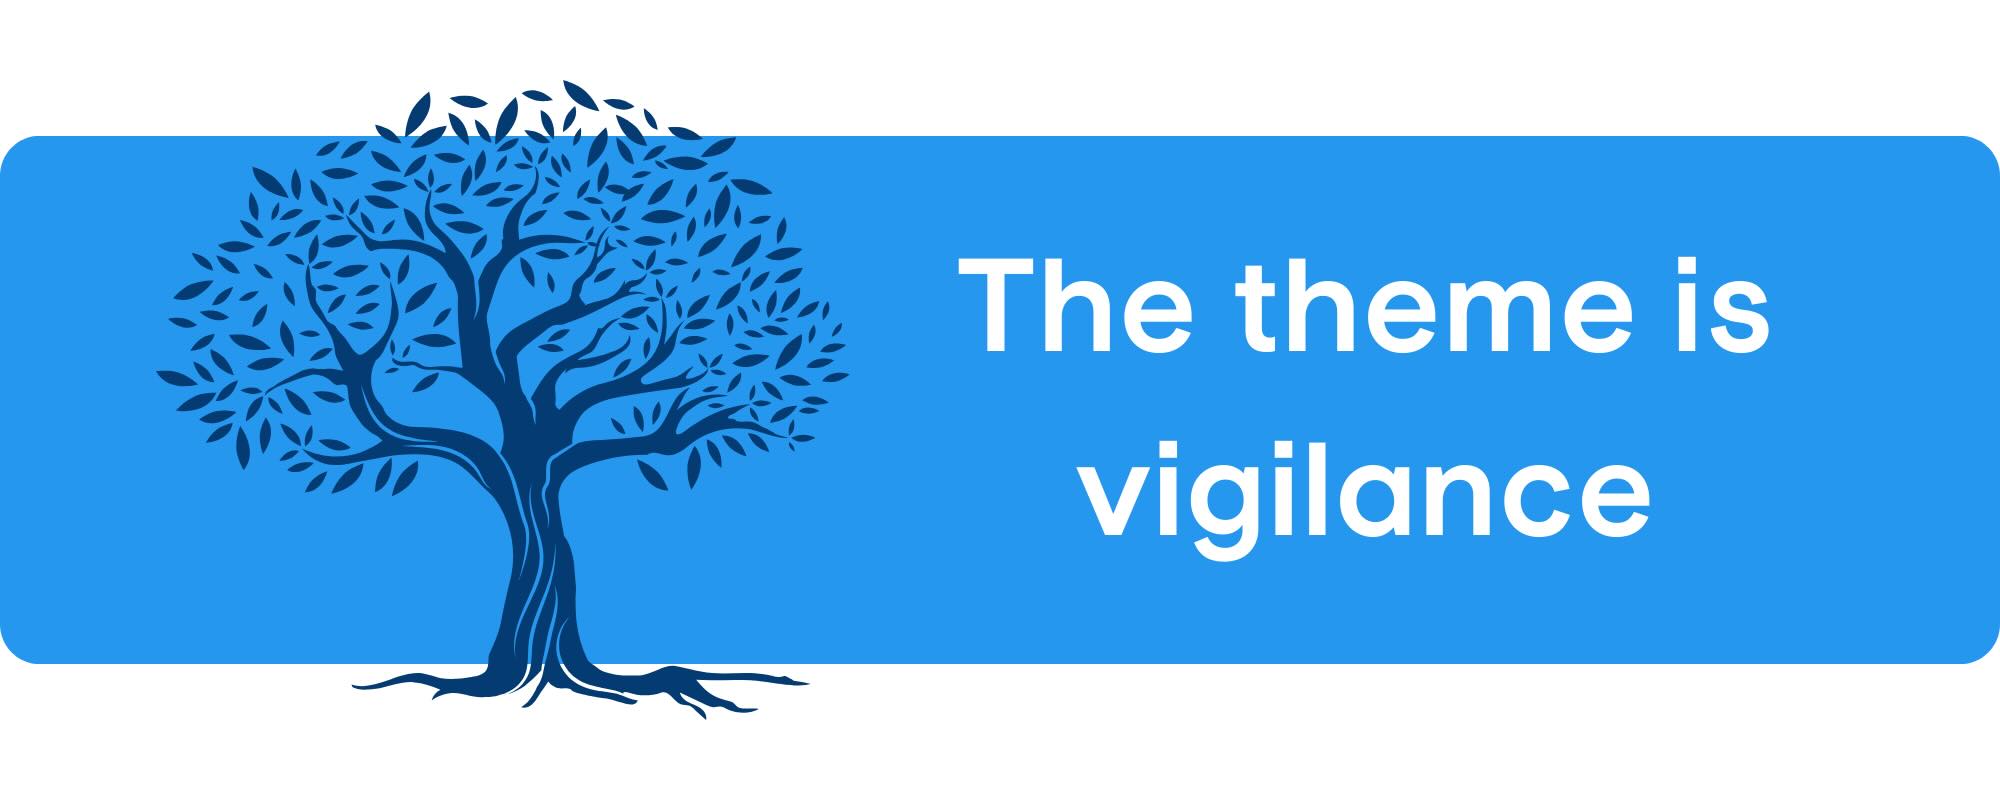 The theme of Holy Tuesday and all of Holy Week is vigilance